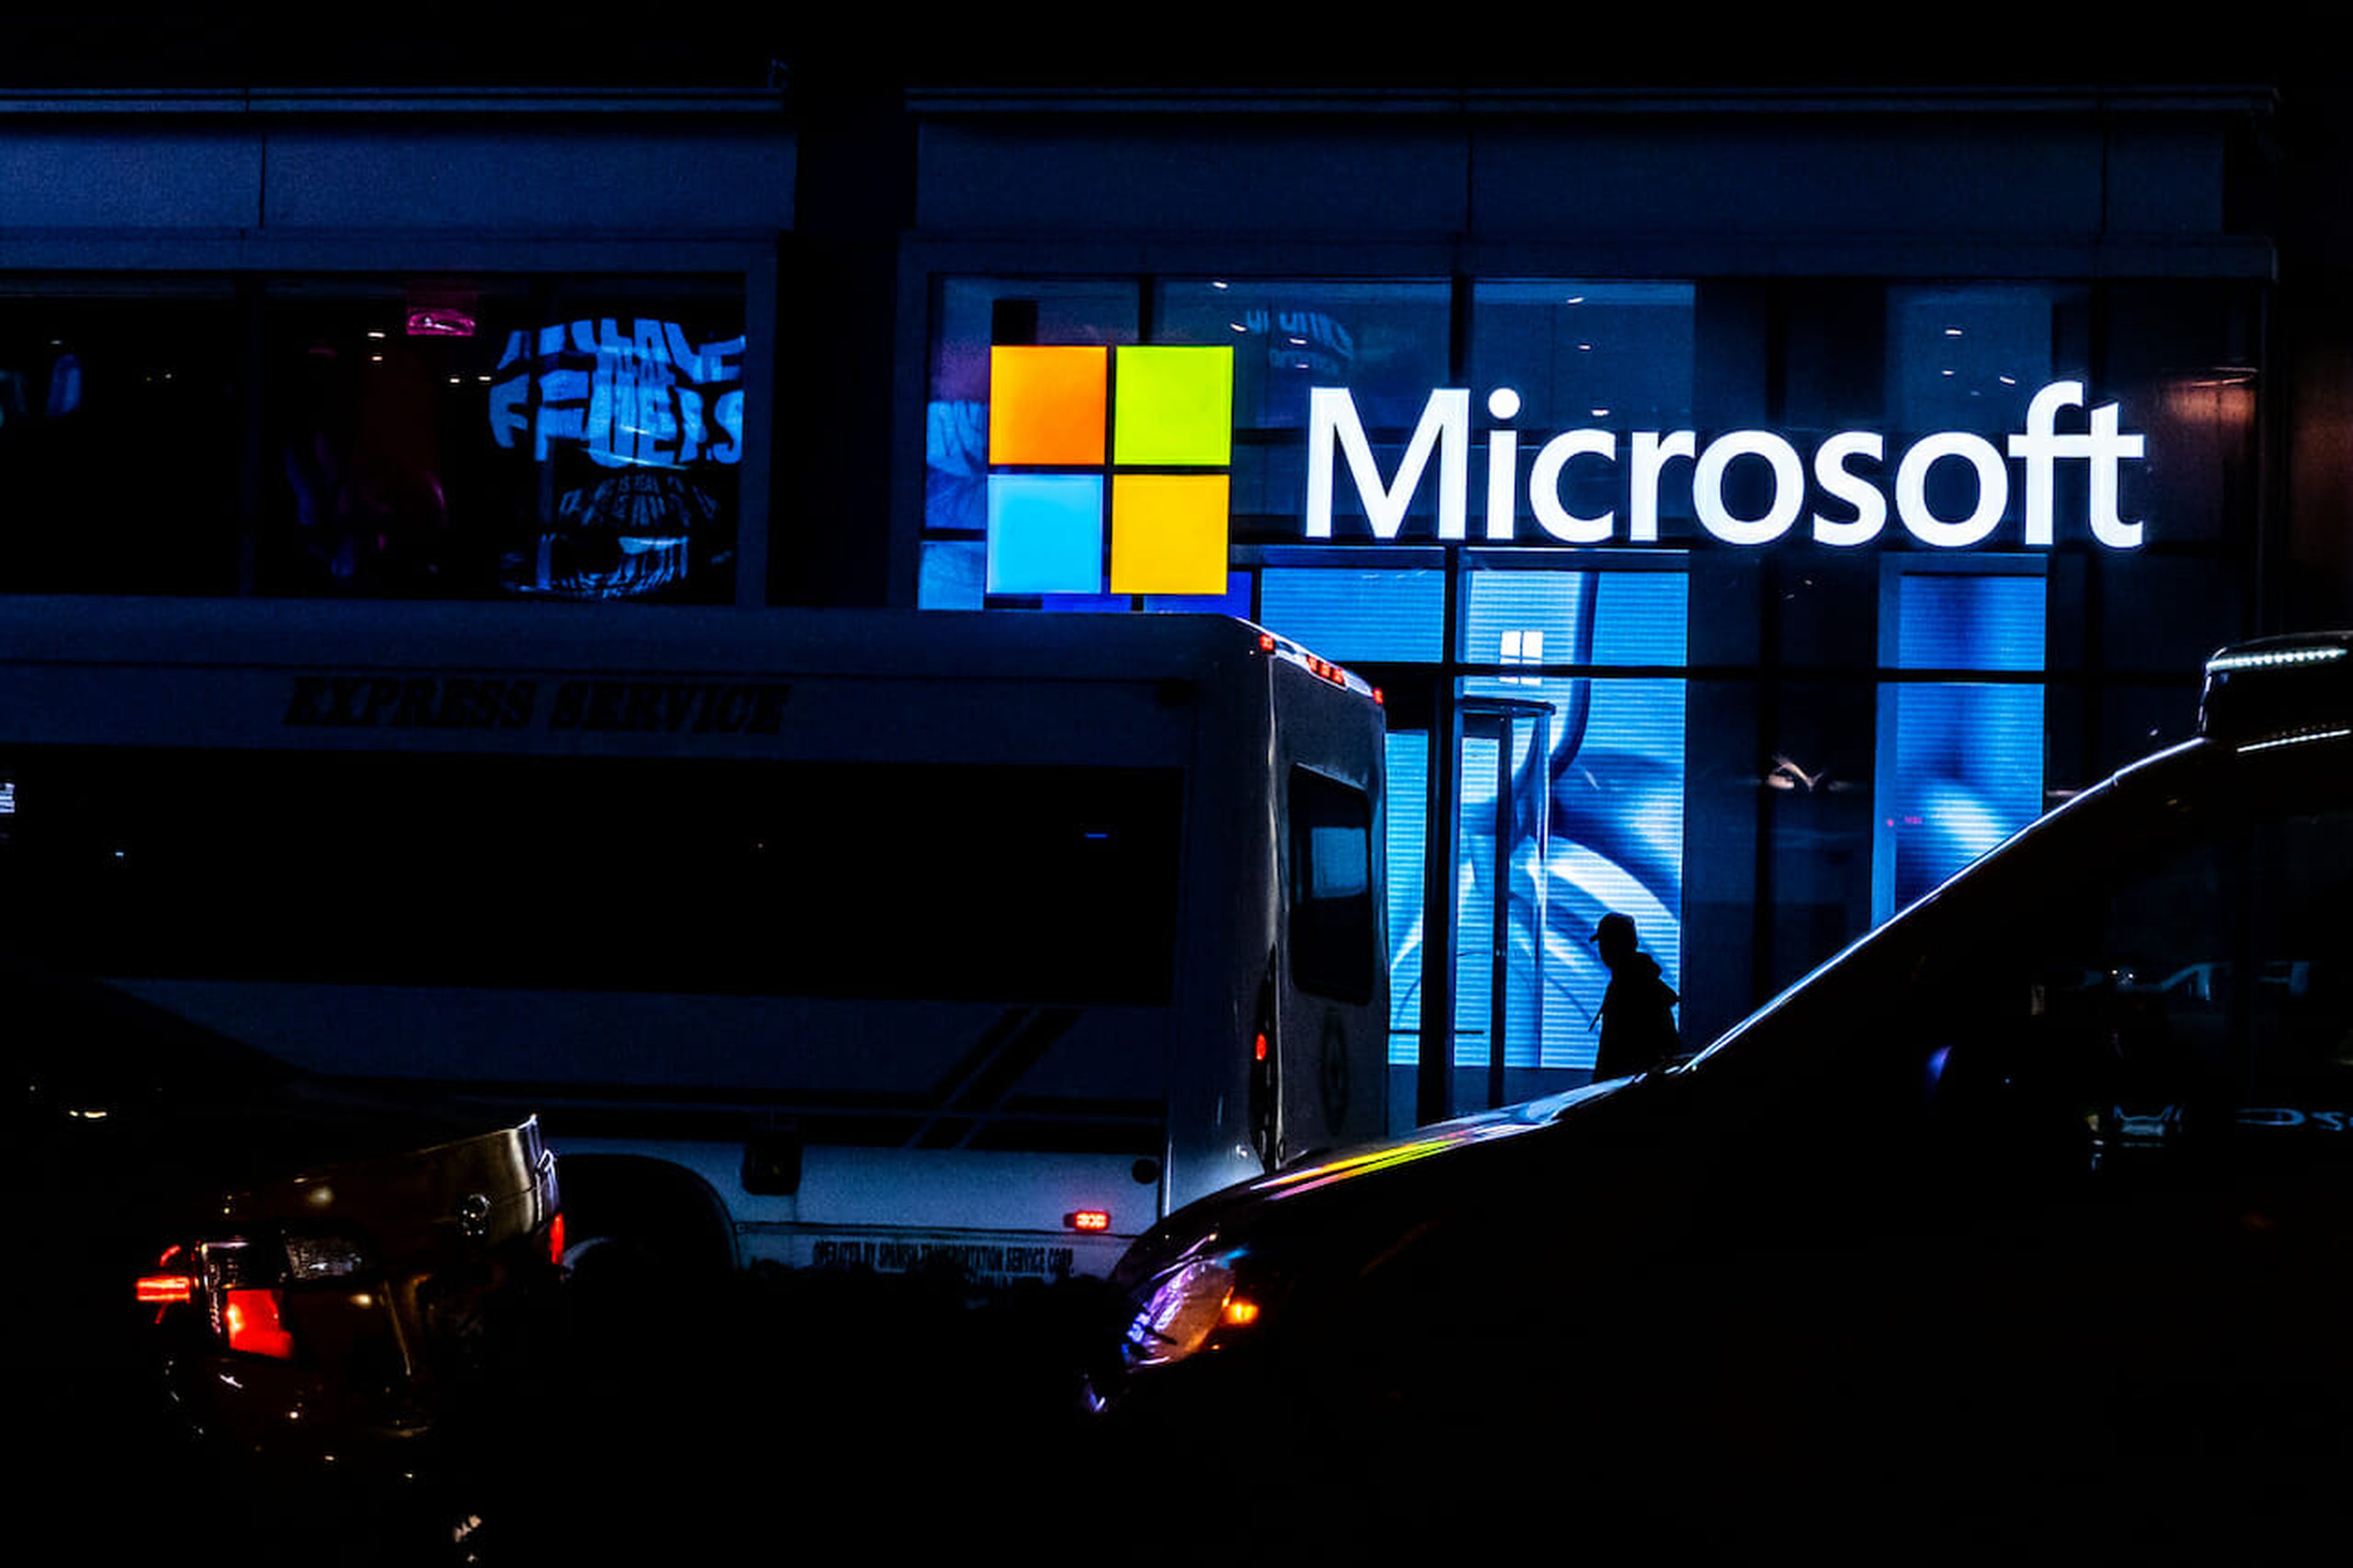 A signage of Microsoft is seen on March 13, 2020 in New York City. Co-founder and former CEO of Microsoft Bill Gates steps down from Microsoft board to spend more time on the Bill and Melinda Gates Foundation. (Photo by Jeenah Moon/Getty Images)